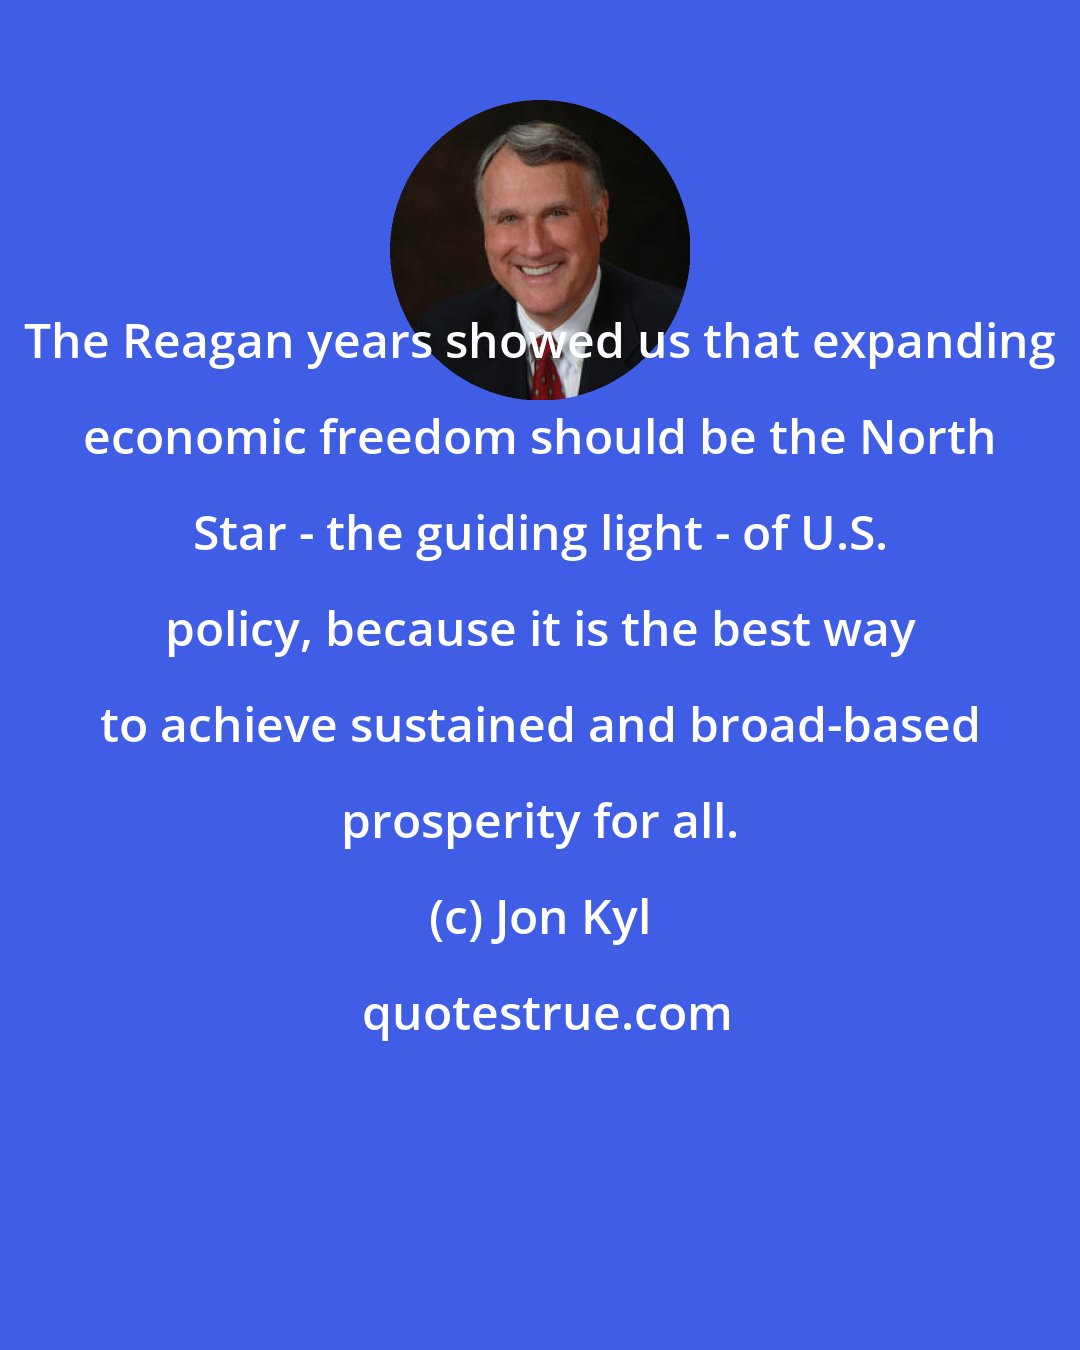 Jon Kyl: The Reagan years showed us that expanding economic freedom should be the North Star - the guiding light - of U.S. policy, because it is the best way to achieve sustained and broad-based prosperity for all.